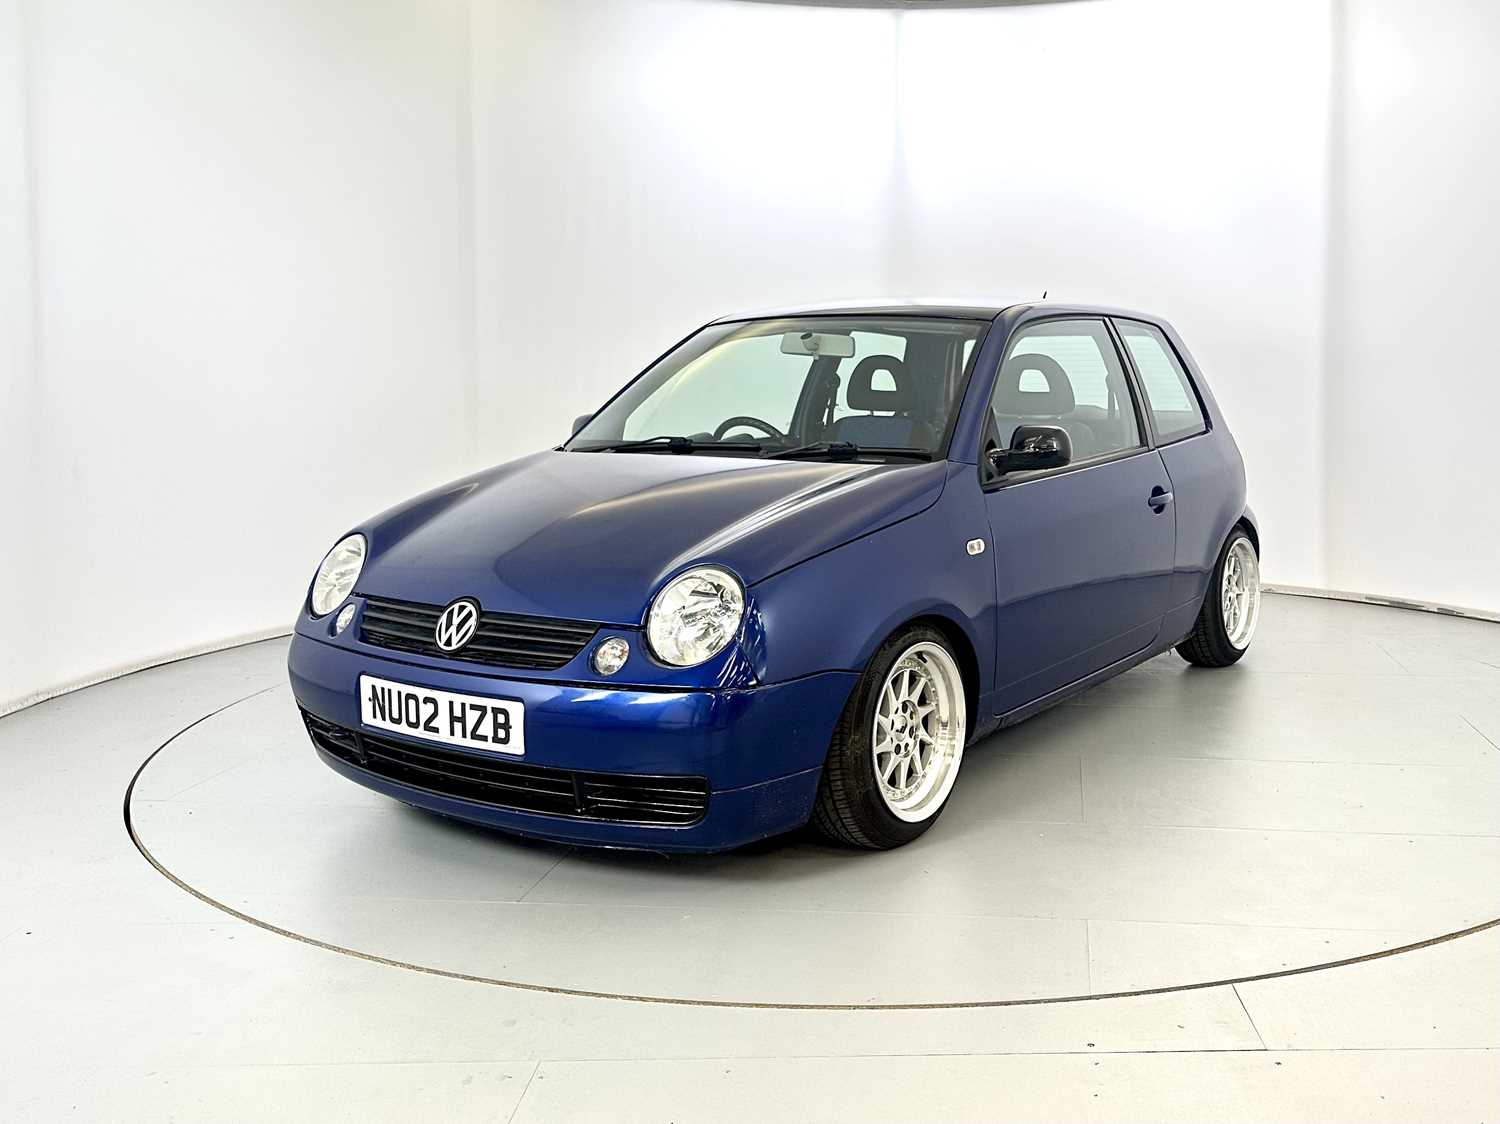 2002 Volkswagen Lupo - Image 3 of 28